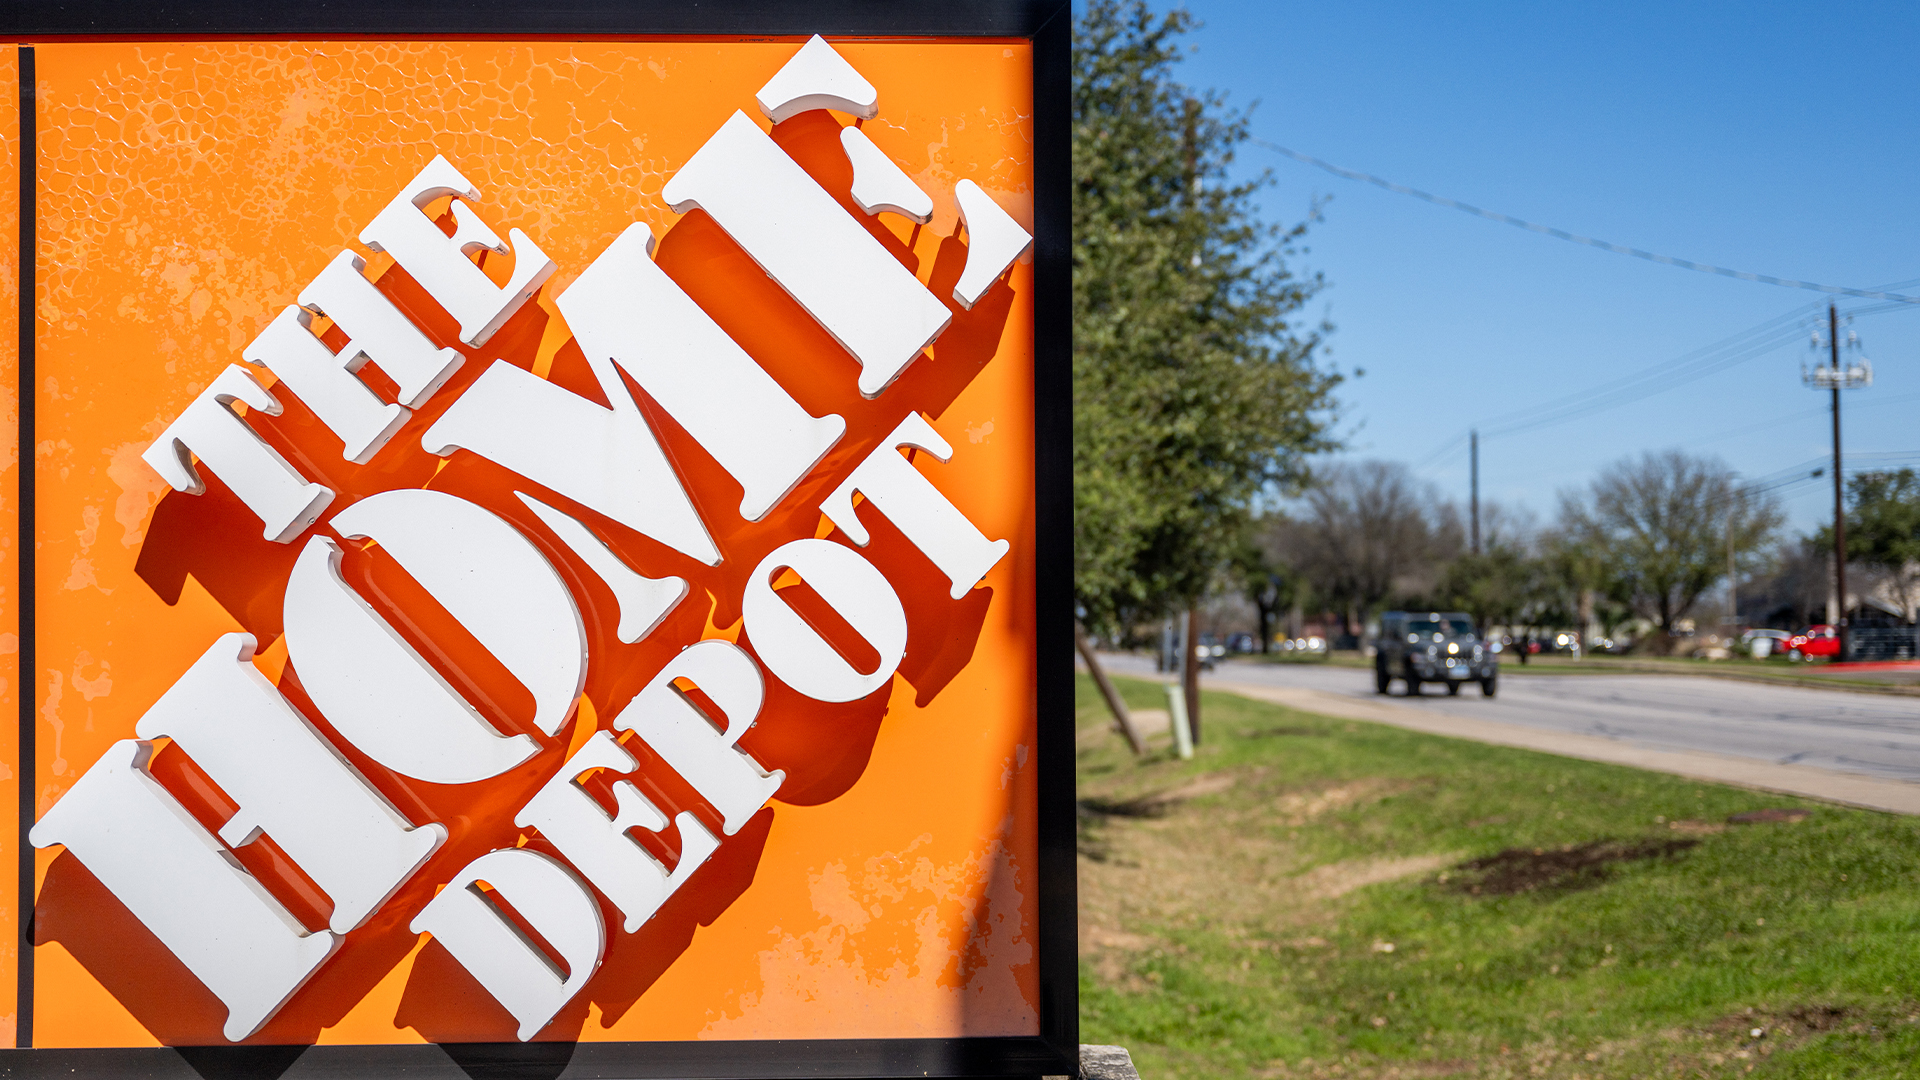 Breaking: Home Depot Employee Data Leaked in Latest Cyber Attack – What Shoppers Need to Know